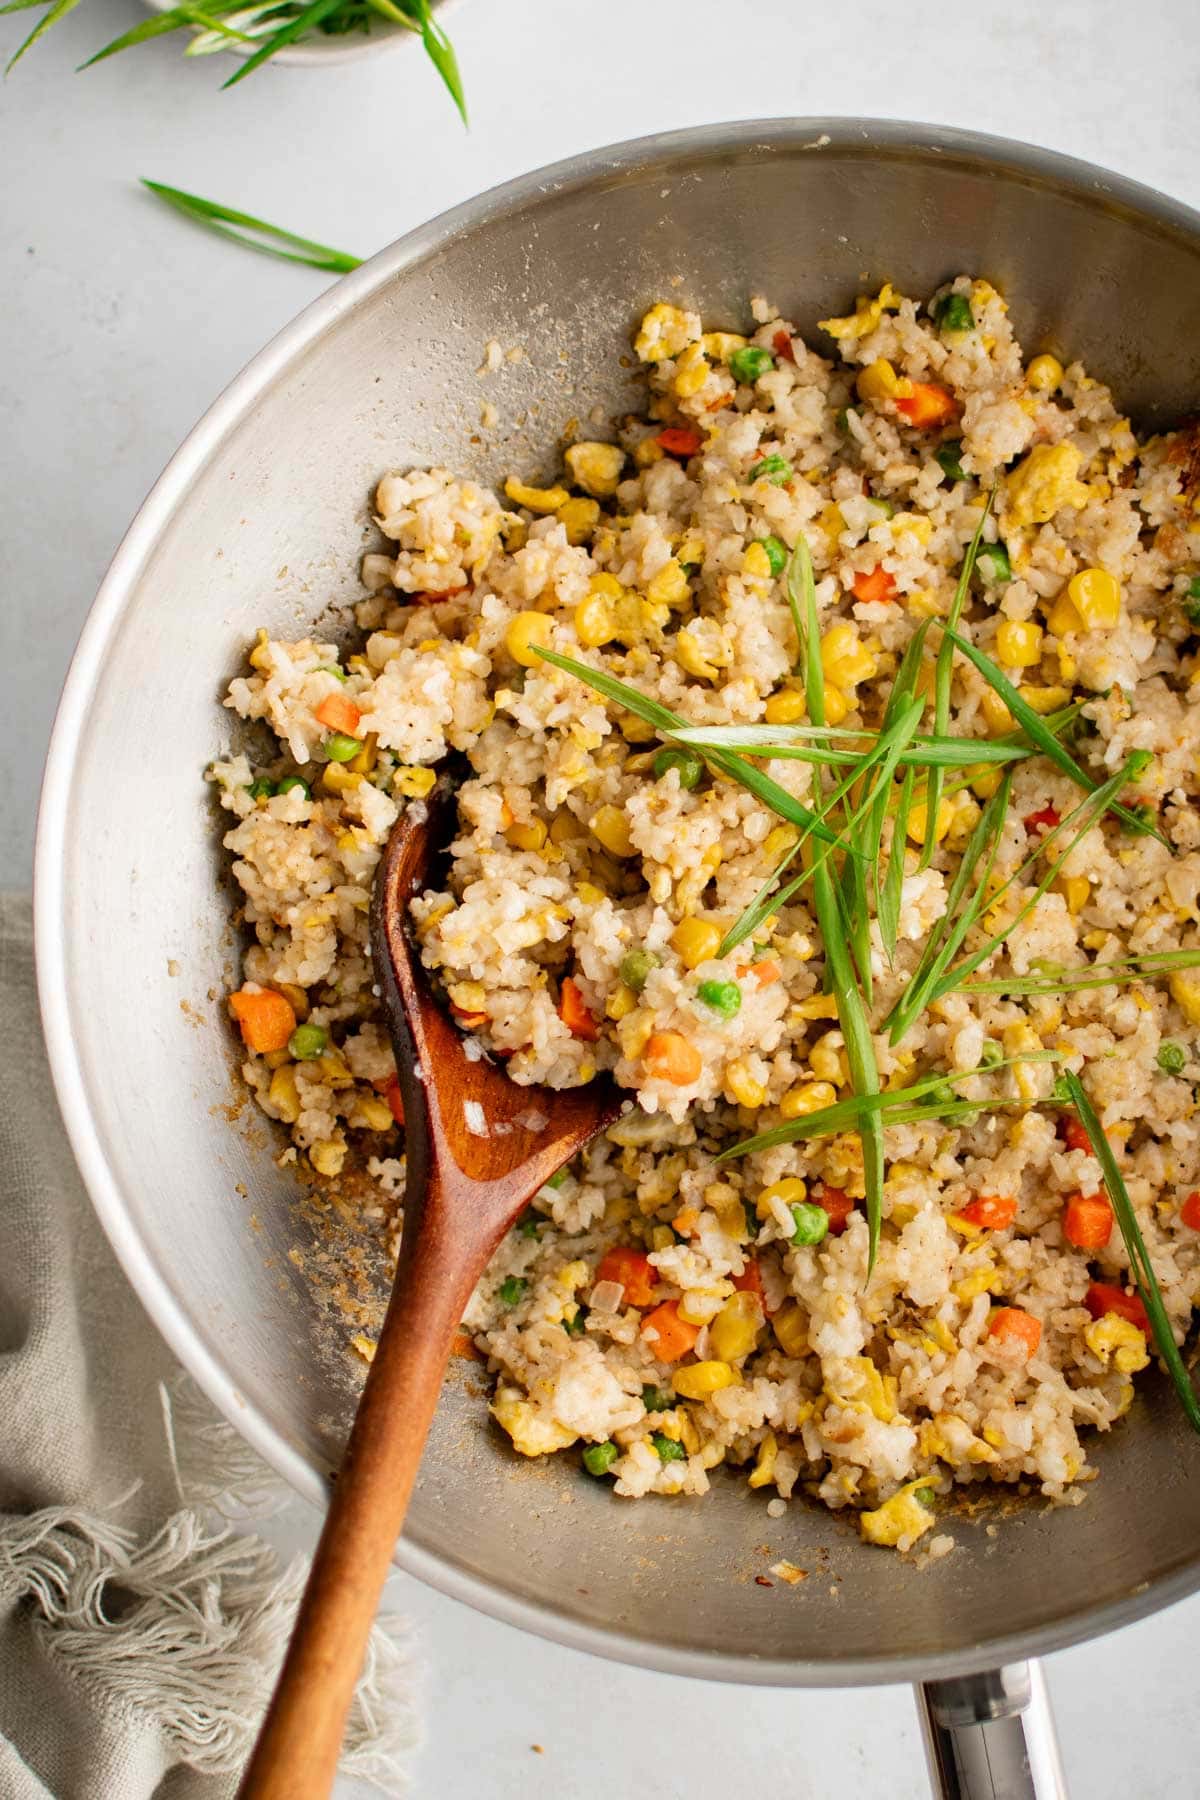 Fried rice in a wok with a wooden spoon.